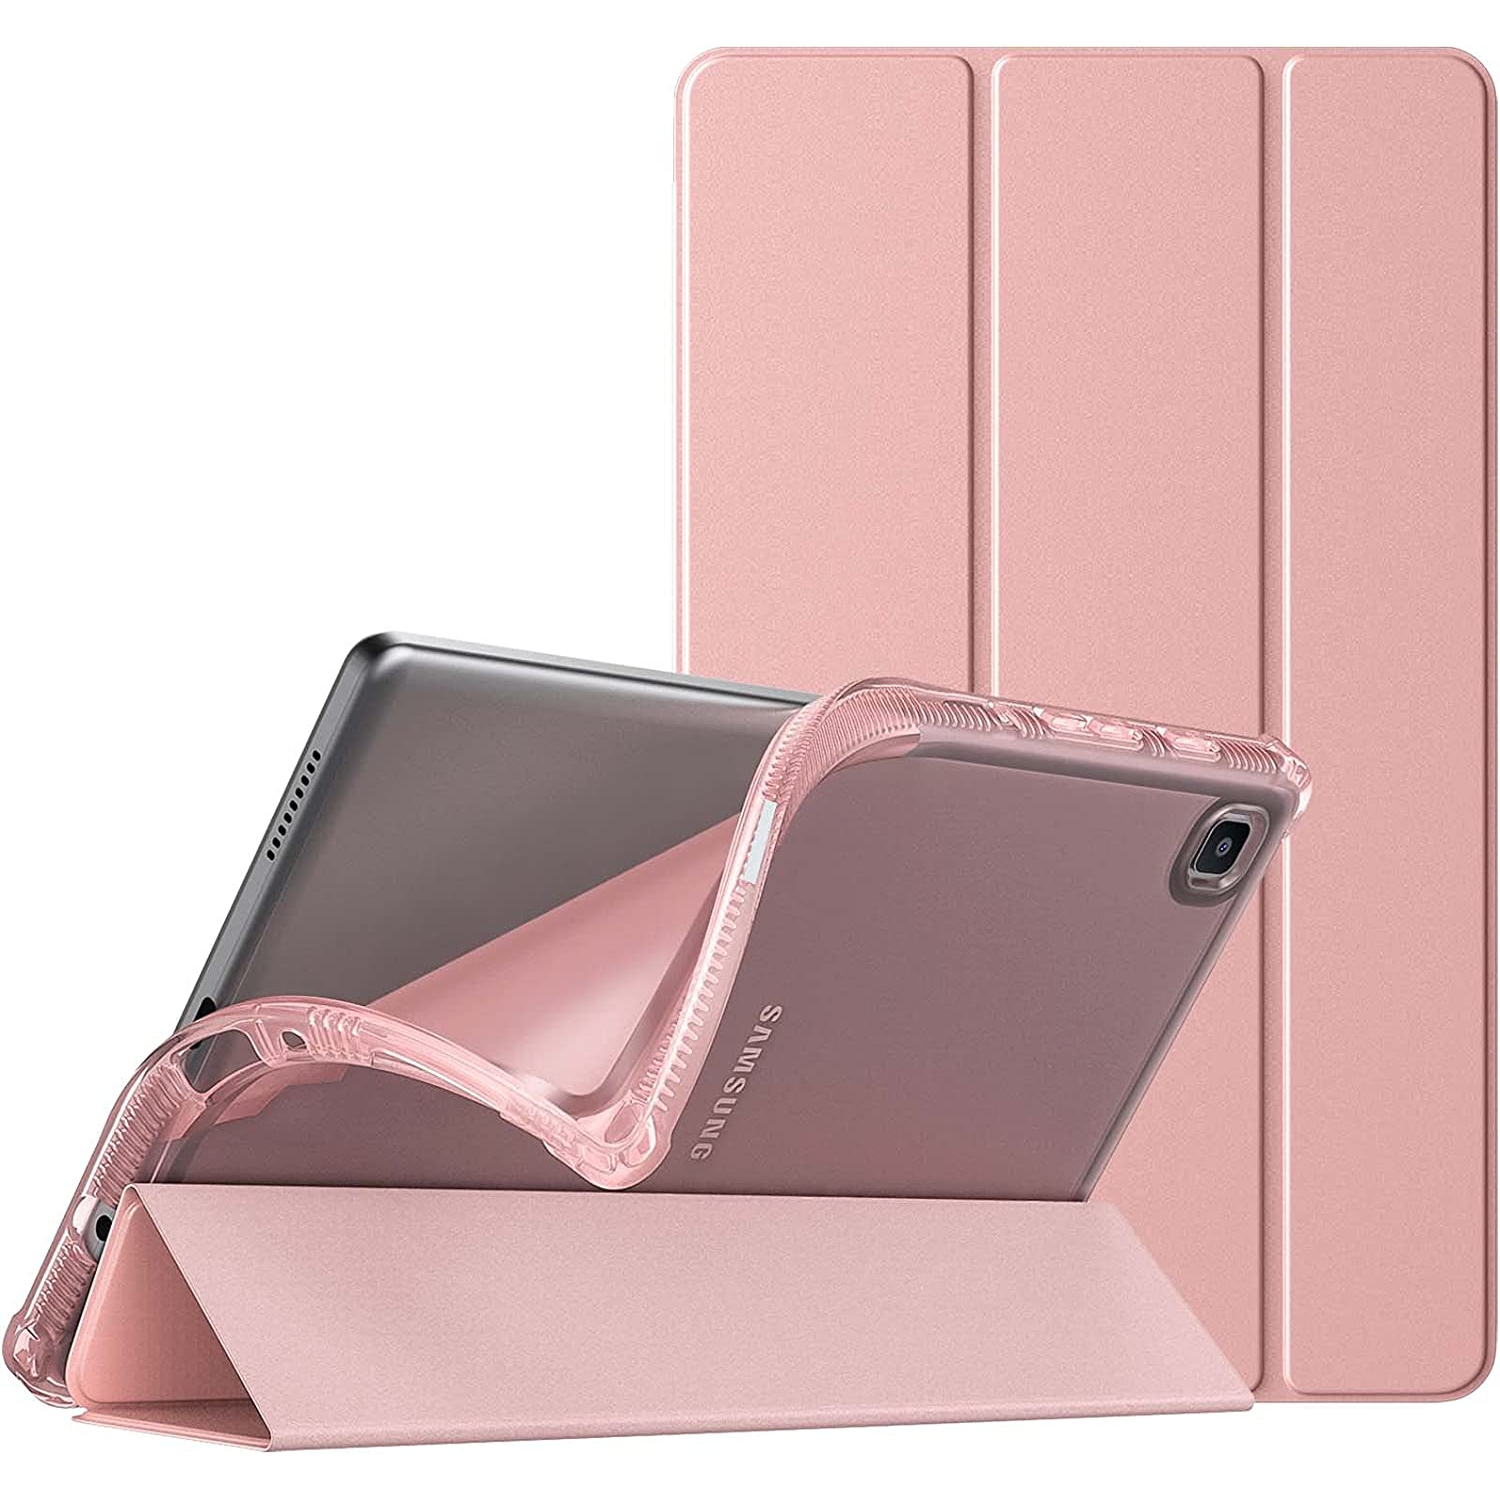 T Case for Samsung Galaxy Tab A7 Lite 8.7 2021 (SM-T220/ T225/T227) Tablet, Slim TPU Translucent Frosted Back Protective Cover Shell, Tri-Fold Stand Cover Fit Galaxy Tab A7 Lite 8.